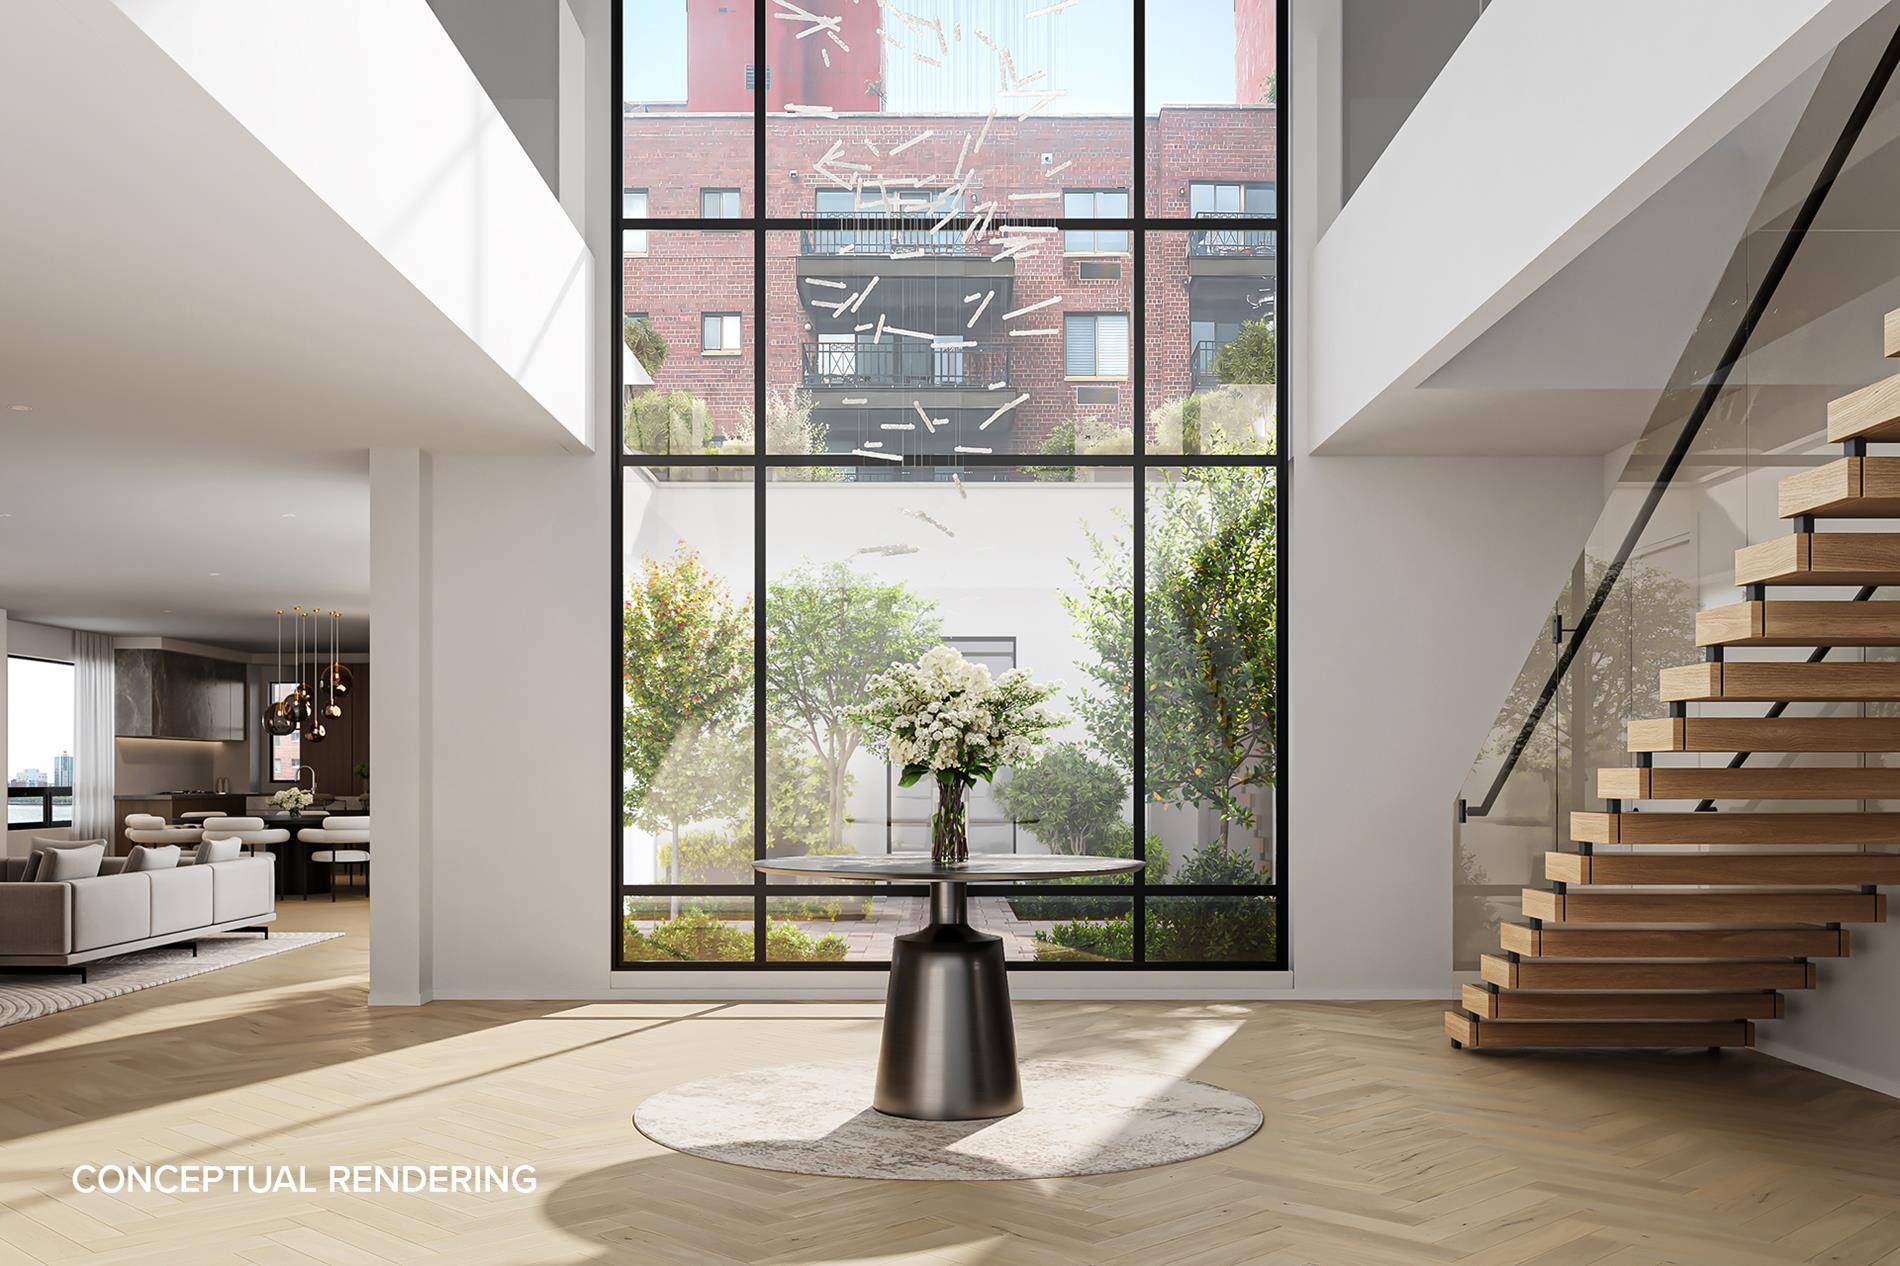 Introducing 165 Perry Street's reimagined contemporary penthouse primed for a complete renovation.